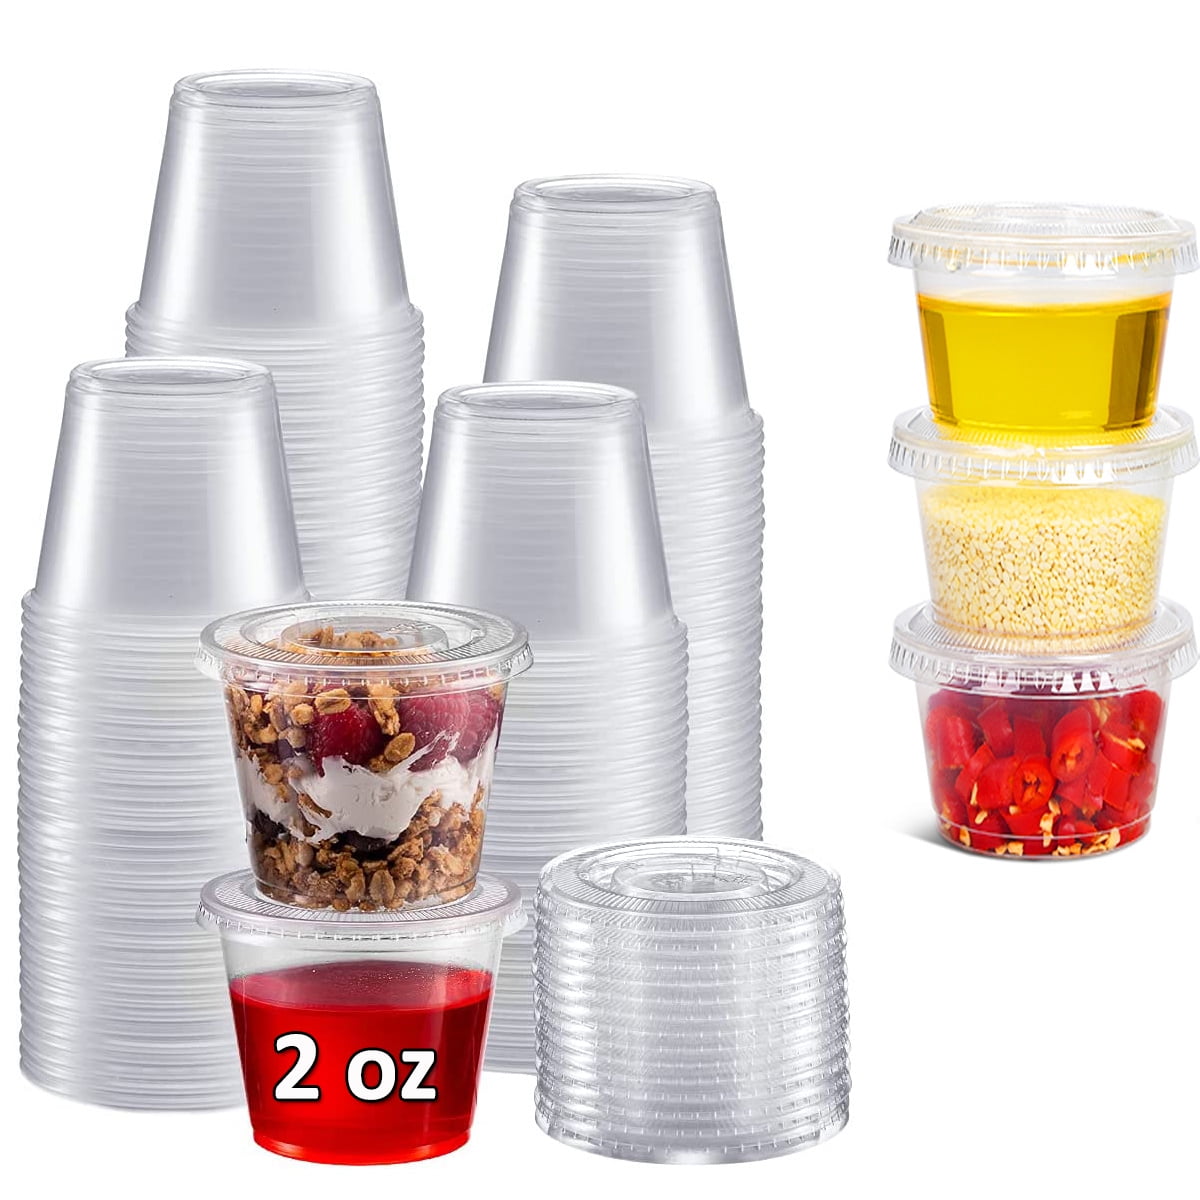 PAMI Portion Control Cups With Lids 4oz, 100-Pack- Small Meal Prep Plastic Food  Containers- BPA-Free Disposable Ramekin Cups- Deli Containers For  Condiments, Sauces, Salsas, Dips, Jello Shots 100 4oz